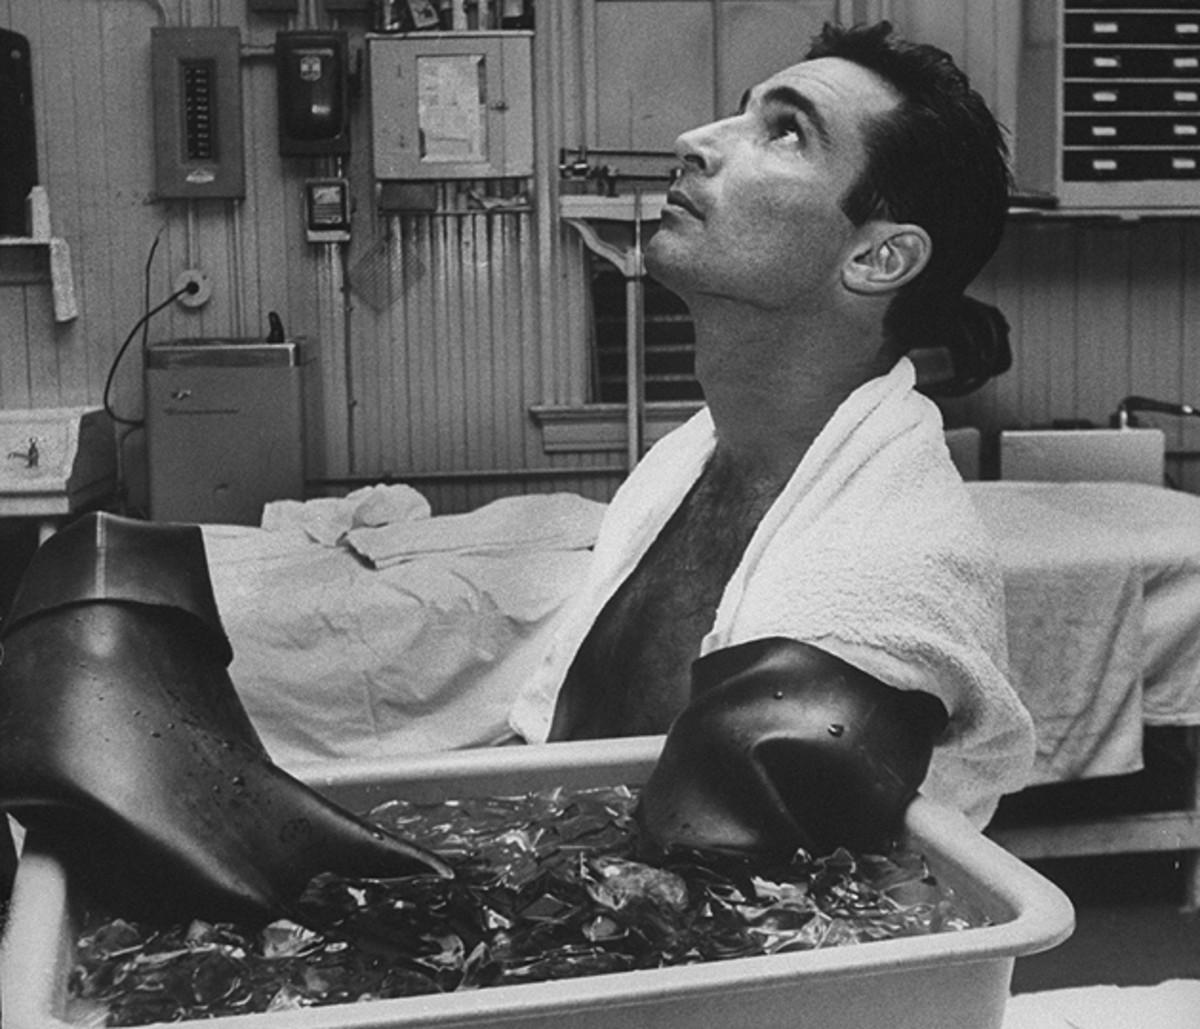 The Left Arm of God: Sandy Koufax was pitcher perfect on and off